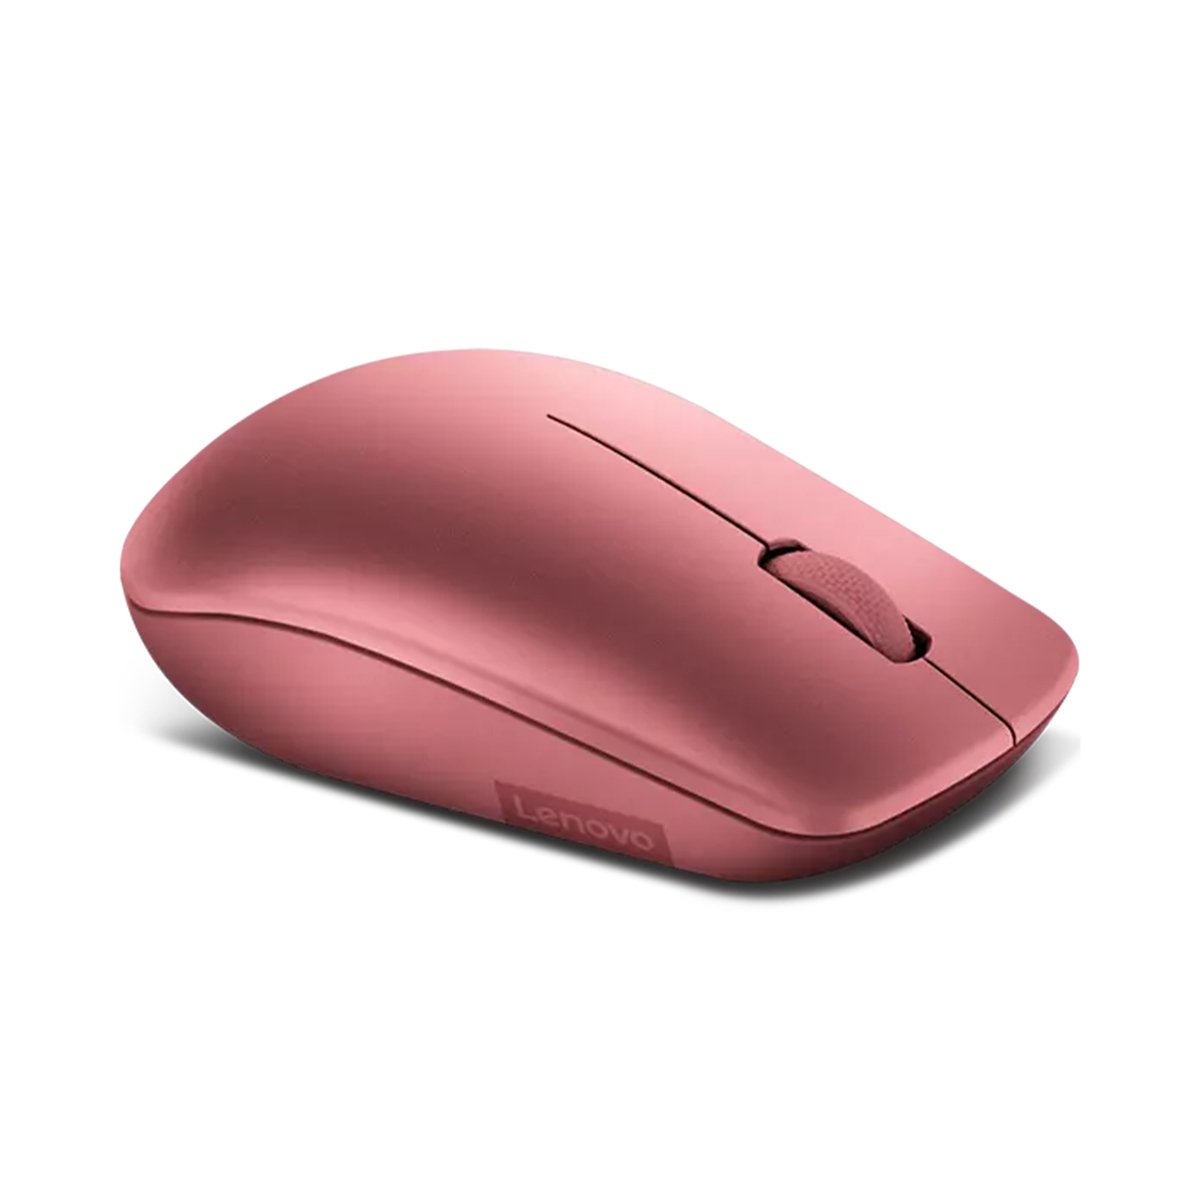 Lenovo 530 Wireless Mouse - Red GY50Z18990